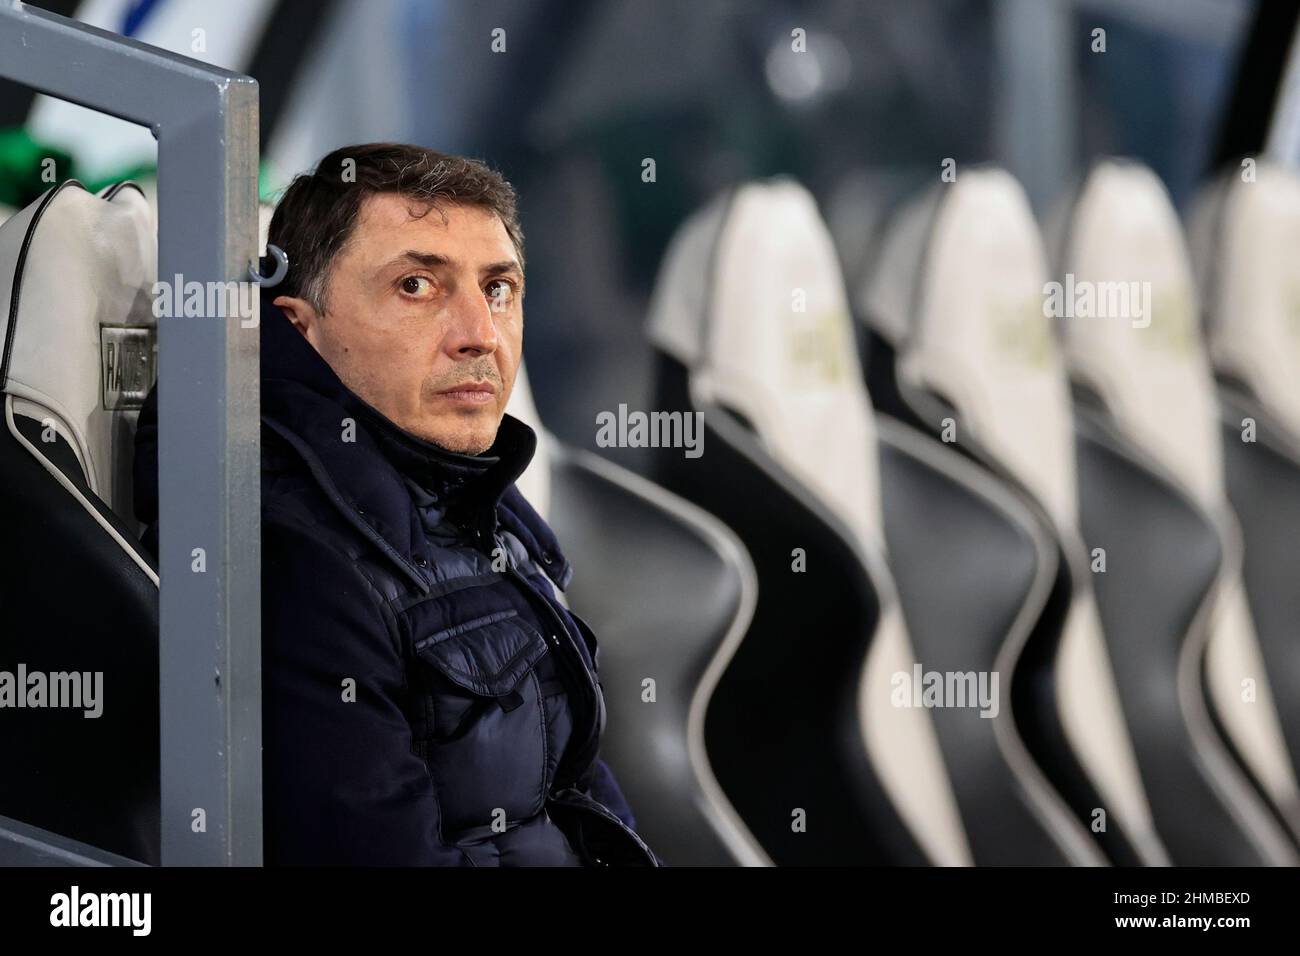 Derby, UK. 08th Feb, 2022. Shota Arveladze the Hull City manager waits in the dug out before the game in Derby, United Kingdom on 2/8/2022. (Photo by Conor Molloy/News Images/Sipa USA) Credit: Sipa USA/Alamy Live News Stock Photo